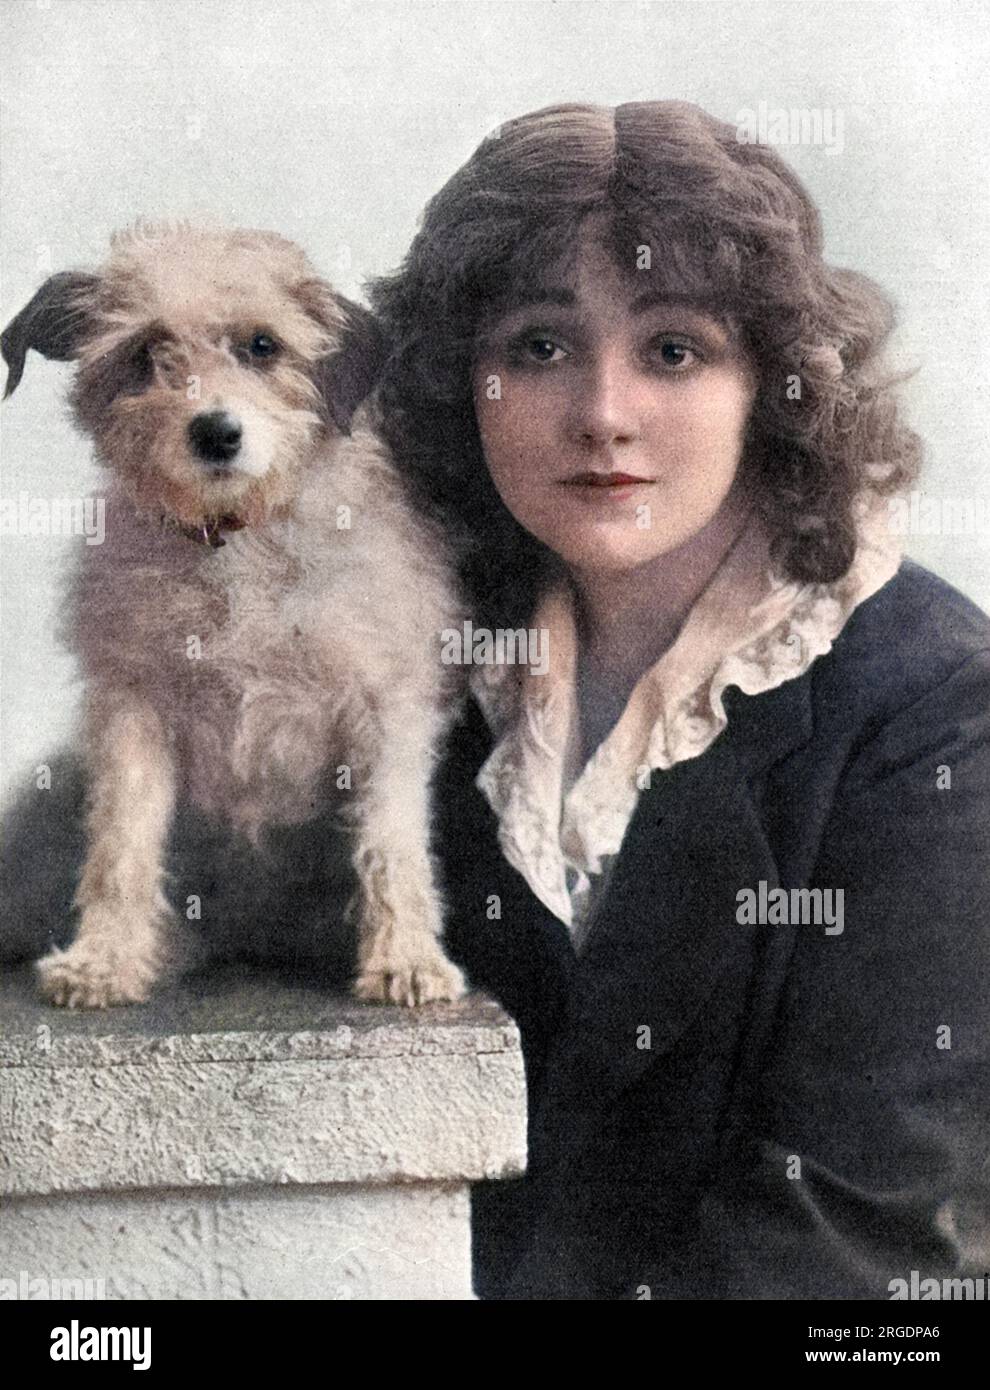 Miss Laurette Taylor (1883-1946) American actress born Loretta Helen Clooney. She appeared in one of the most popular shows of the First World War in London, Peg O' My Heart, written by her husband J Hartley Manners. Pictured with Michael, one of the canine stars of the show, who according to The Tatler went missing for a while but was soon returned. Stock Photo